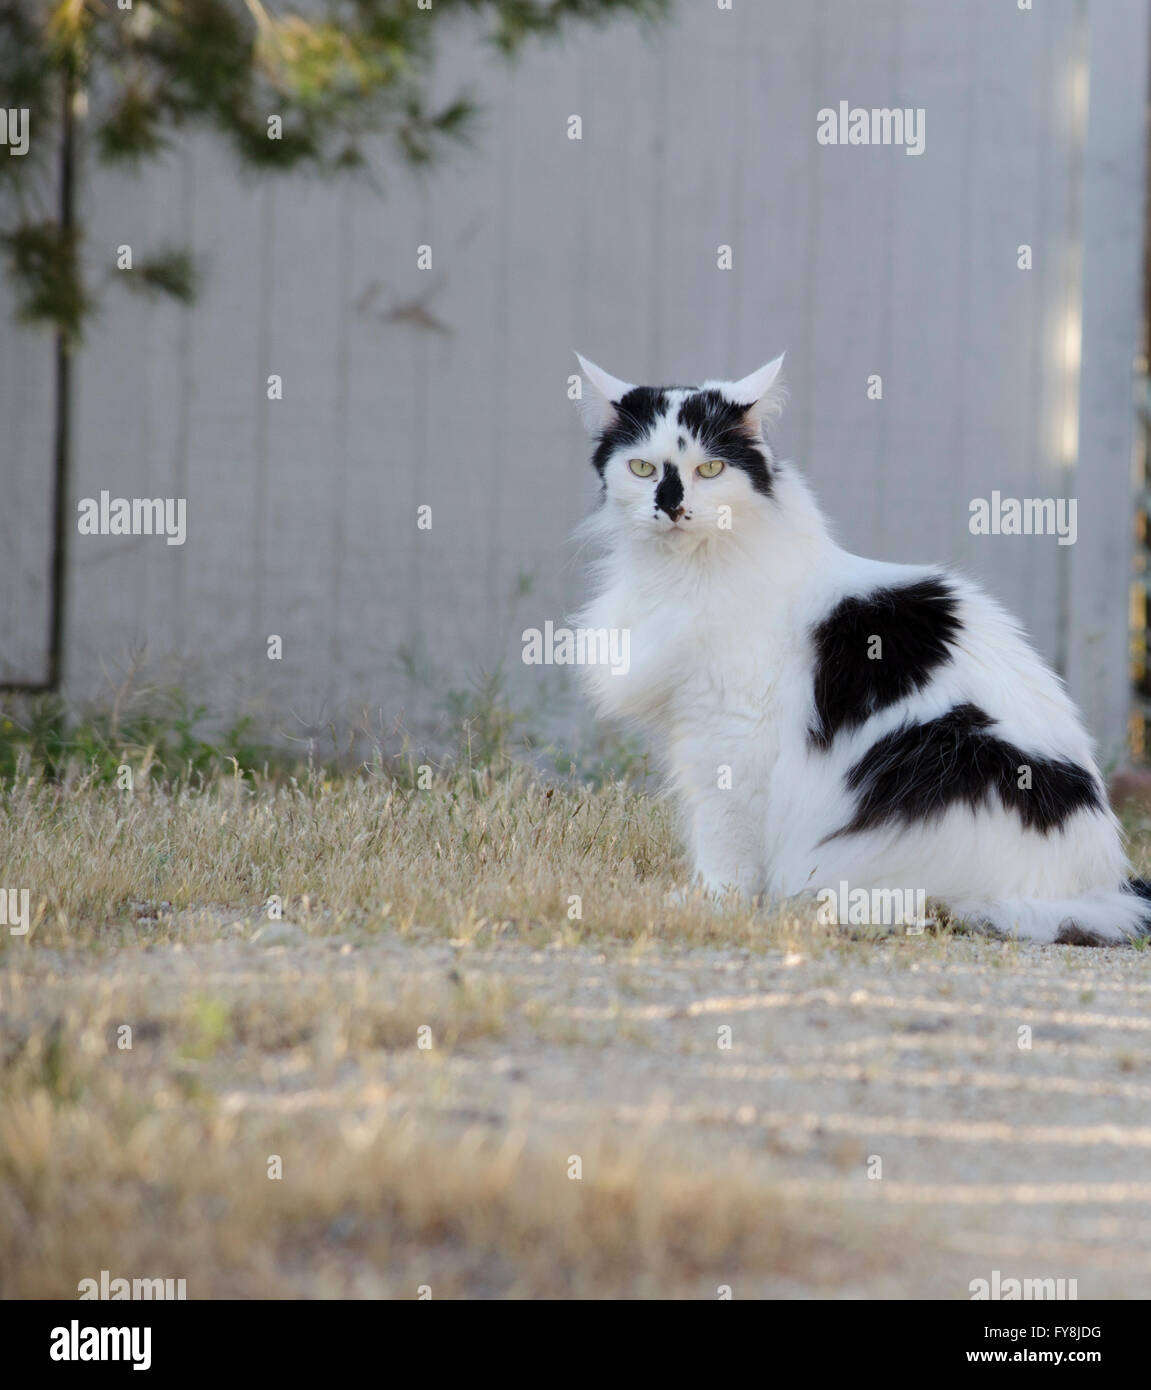 Black and white cat sitting on ground outside. Stock Photo